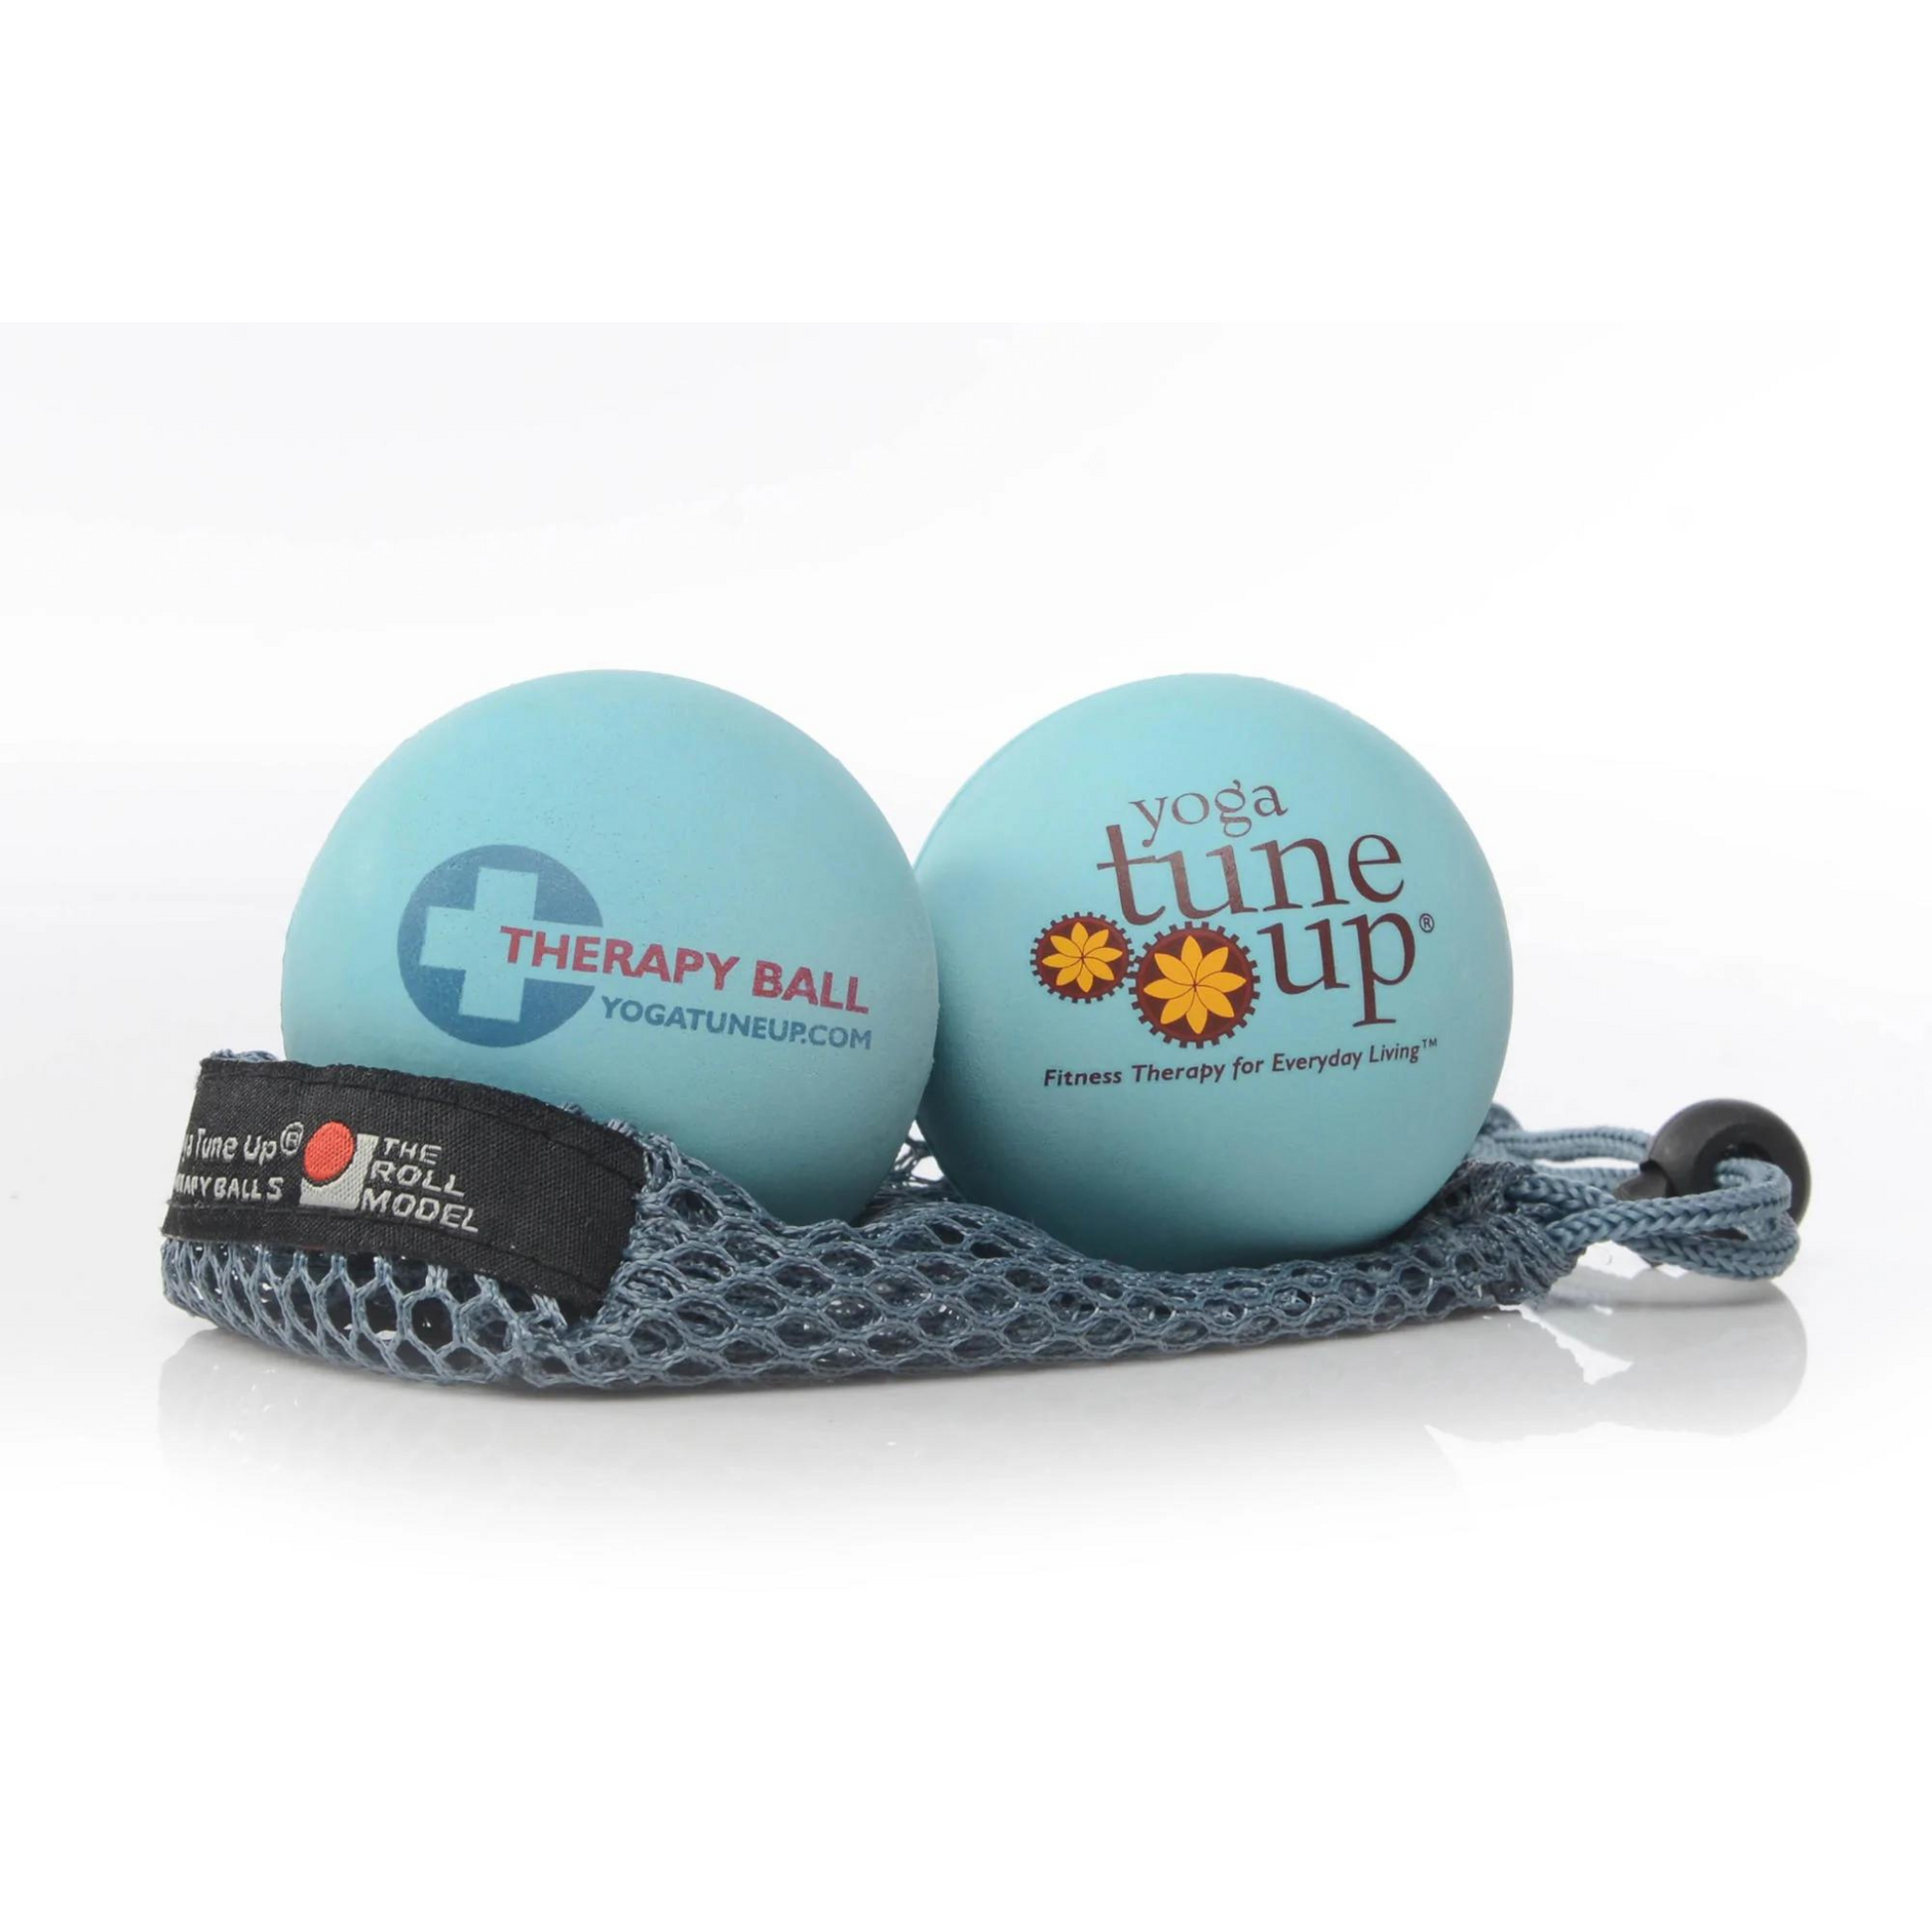 two sky blue therapy balls that read "Therapy Ball yogatuneup.com" and "Yoga Tune Up Fitness Therapy for Everyday Living" sitting on top of a grey mesh carrying bag